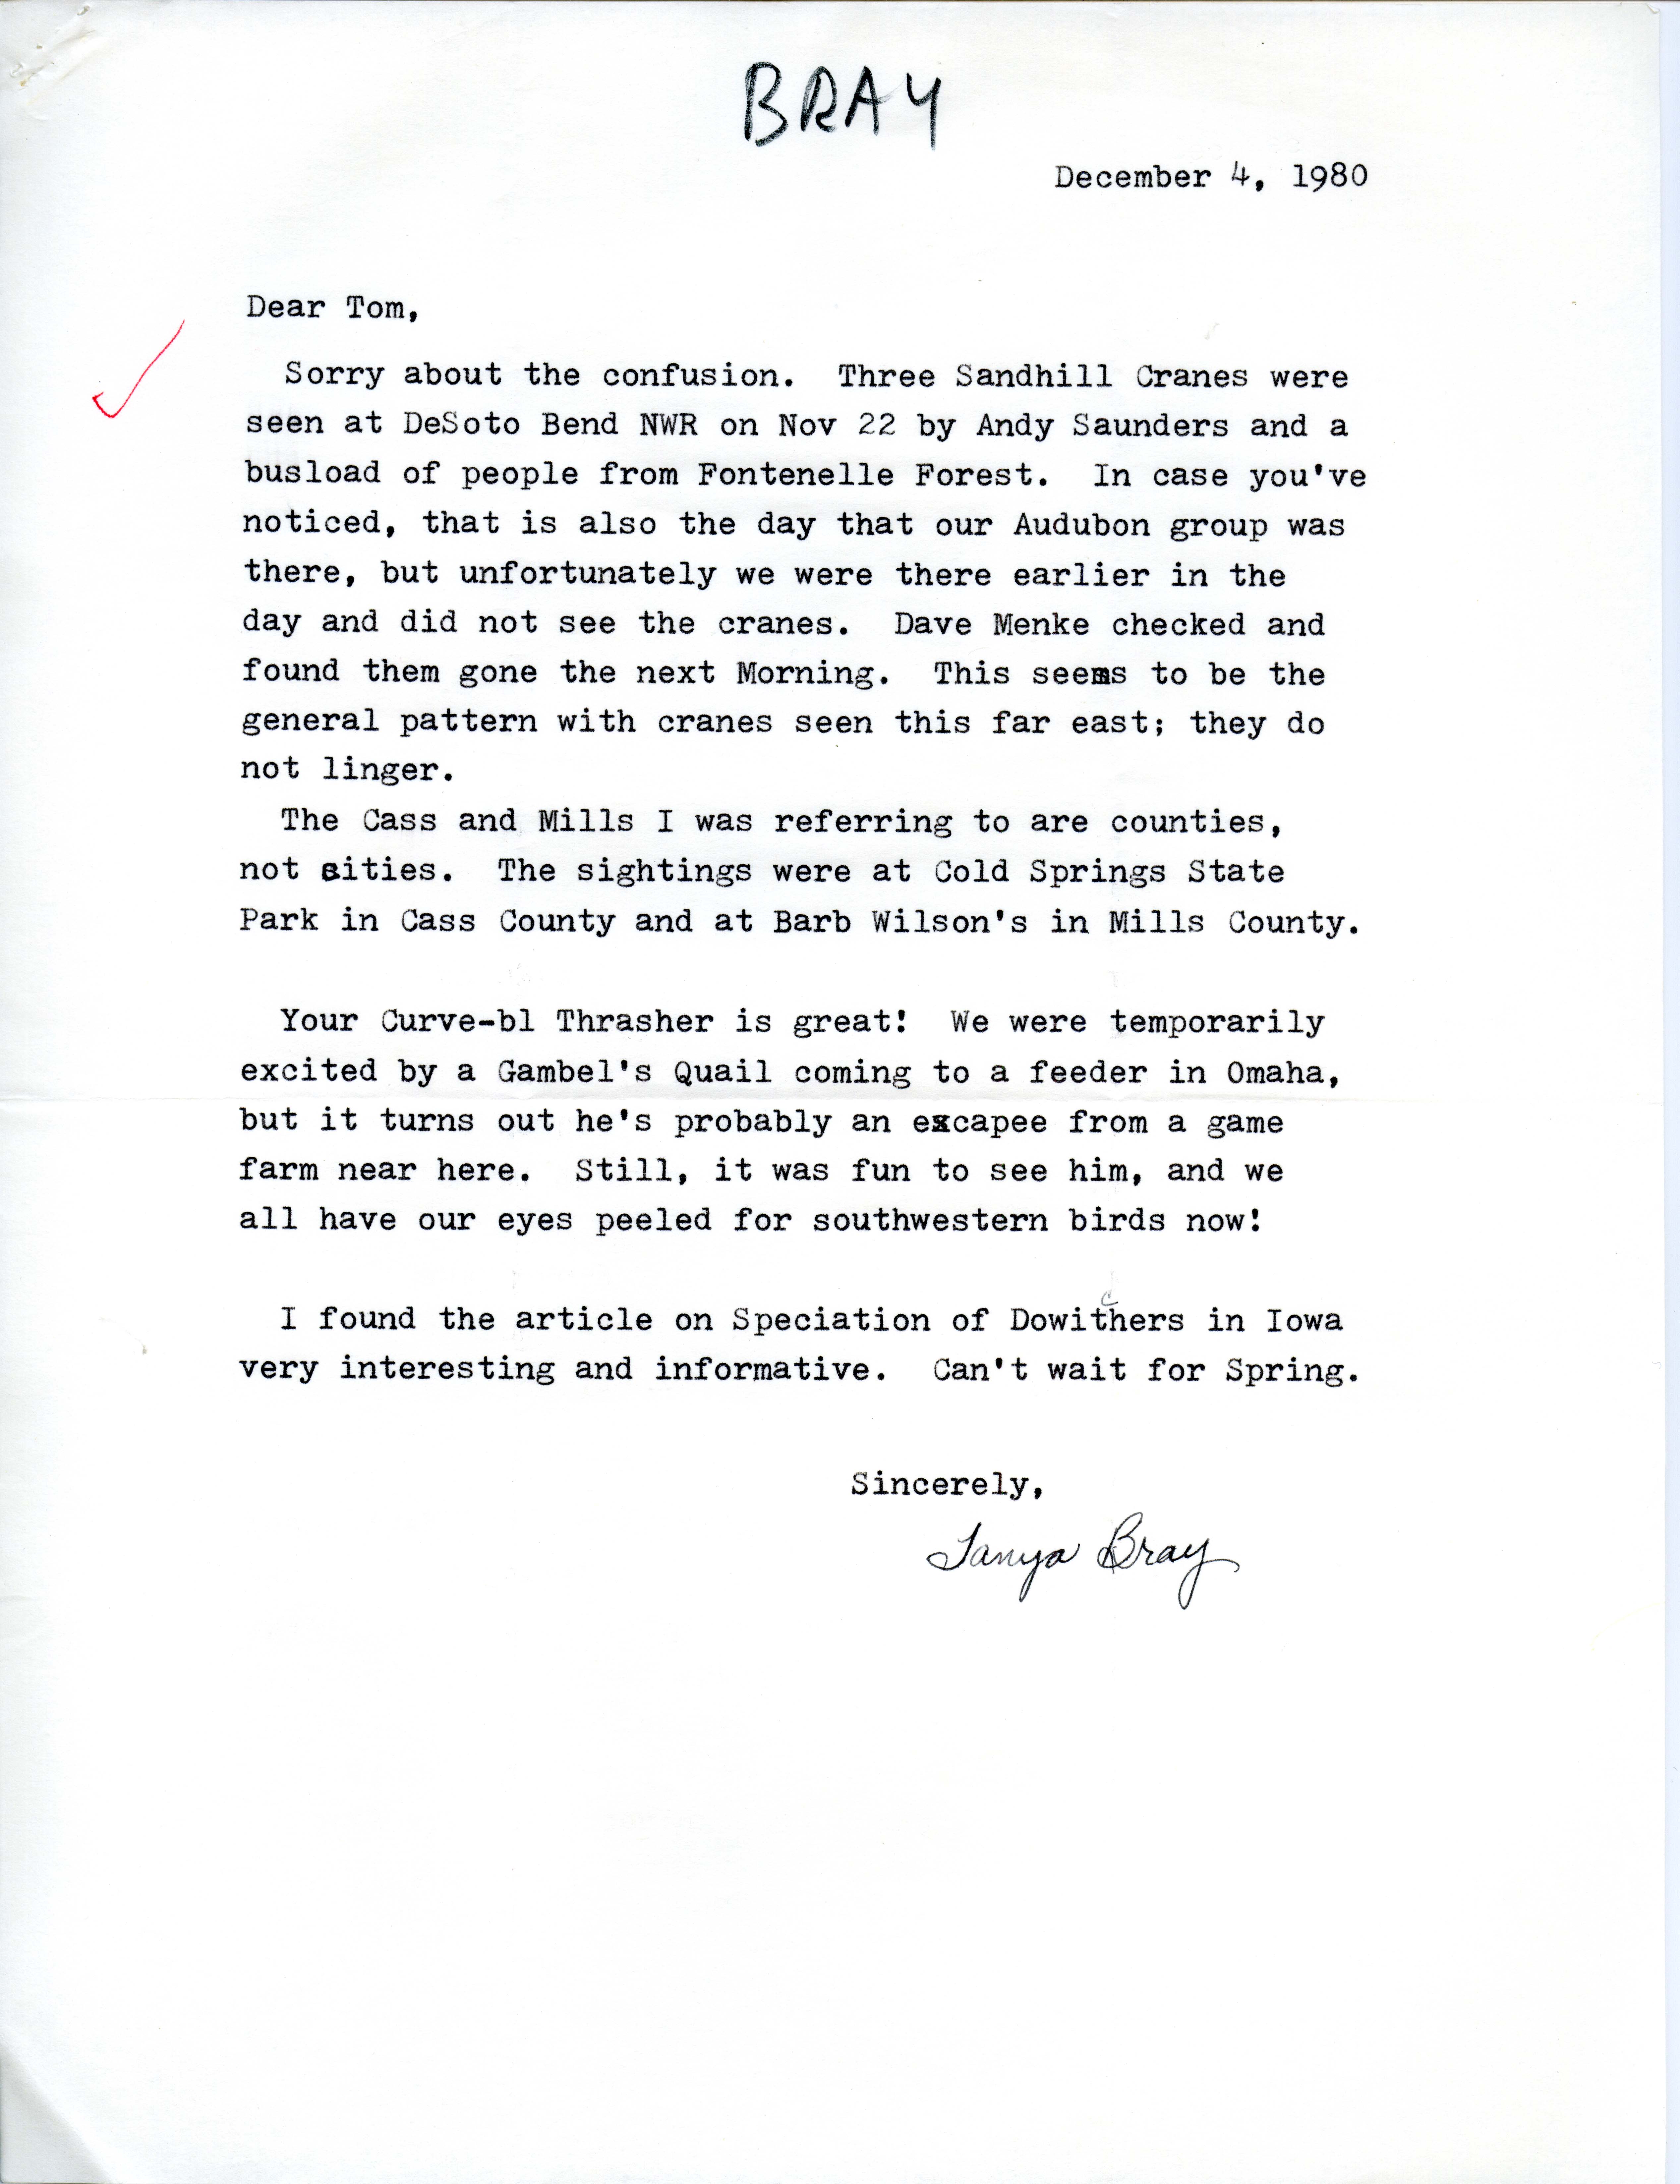 Tanya Bray letter to Thomas Kent regarding clarifications to her previous letter, December 4, 1980